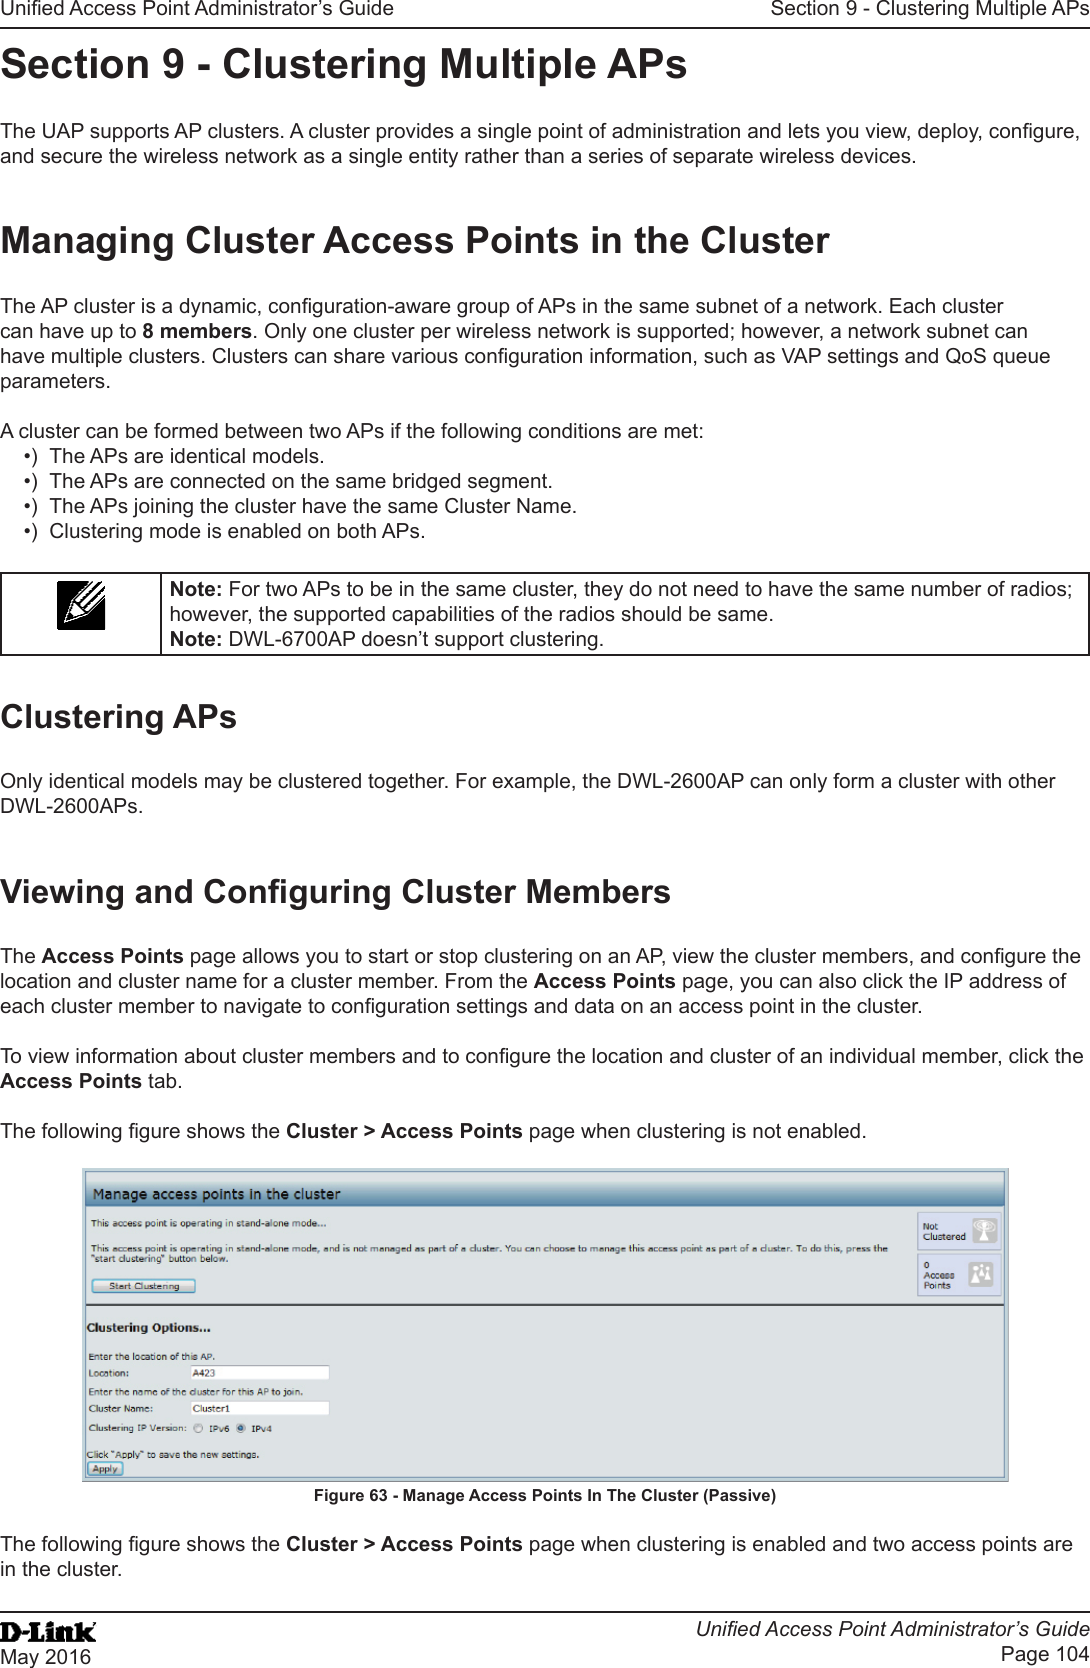 Unied Access Point Administrator’s GuideUnied Access Point Administrator’s GuidePage 104May 2016Section 9 - Clustering Multiple APsSection 9 - Clustering Multiple APsThe UAP supports AP clusters. A cluster provides a single point of administration and lets you view, deploy, congure, and secure the wireless network as a single entity rather than a series of separate wireless devices. Managing Cluster Access Points in the ClusterThe AP cluster is a dynamic, conguration-aware group of APs in the same subnet of a network. Each cluster can have up to 8 members. Only one cluster per wireless network is supported; however, a network subnet can have multiple clusters. Clusters can share various conguration information, such as VAP settings and QoS queue parameters.A cluster can be formed between two APs if the following conditions are met:•)  The APs are identical models.•)  The APs are connected on the same bridged segment.•)  The APs joining the cluster have the same Cluster Name.•)  Clustering mode is enabled on both APs.Note: For two APs to be in the same cluster, they do not need to have the same number of radios; however, the supported capabilities of the radios should be same.Note: DWL-6700AP doesn’t support clustering. Clustering APsOnly identical models may be clustered together. For example, the DWL-2600AP can only form a cluster with other DWL-2600APs.Viewing and Conguring Cluster MembersThe Access Points page allows you to start or stop clustering on an AP, view the cluster members, and congure the location and cluster name for a cluster member. From the Access Points page, you can also click the IP address of each cluster member to navigate to conguration settings and data on an access point in the cluster. To view information about cluster members and to congure the location and cluster of an individual member, click the Access Points tab.The following gure shows the Cluster &gt; Access Points page when clustering is not enabled.Figure 63 - Manage Access Points In The Cluster (Passive)The following gure shows the Cluster &gt; Access Points page when clustering is enabled and two access points are in the cluster.